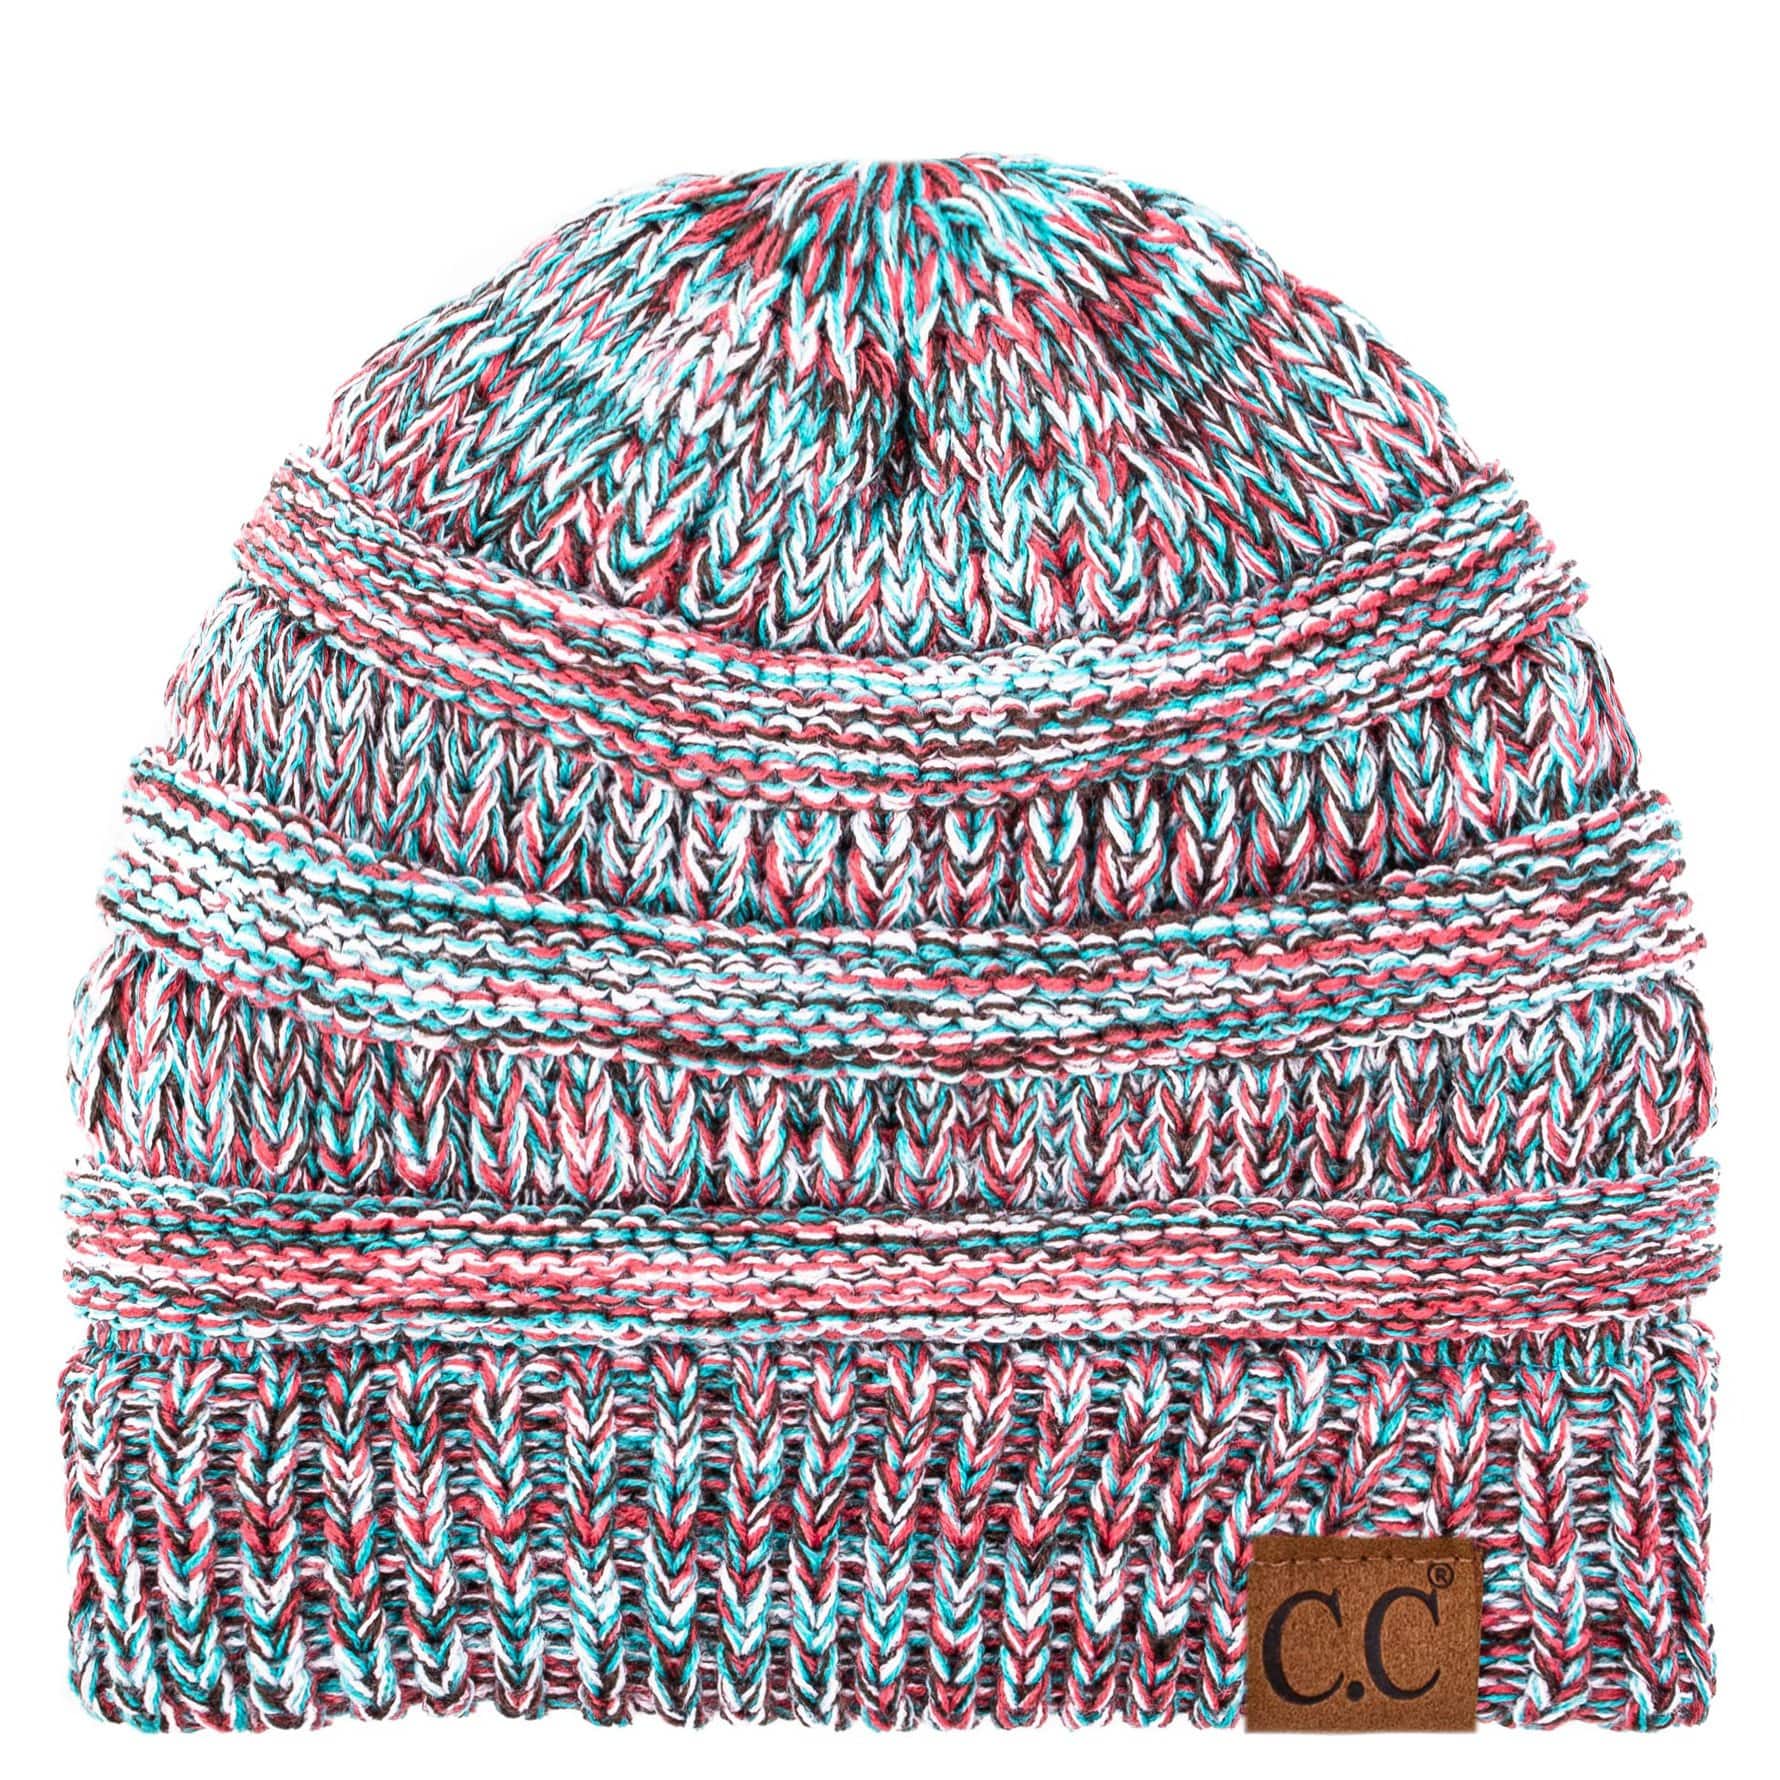 C.C Apparel Mint/Red Mix C.C Trendy Warm Chunky Soft Stretch Three-Toned Cable Knit Beanie Skully